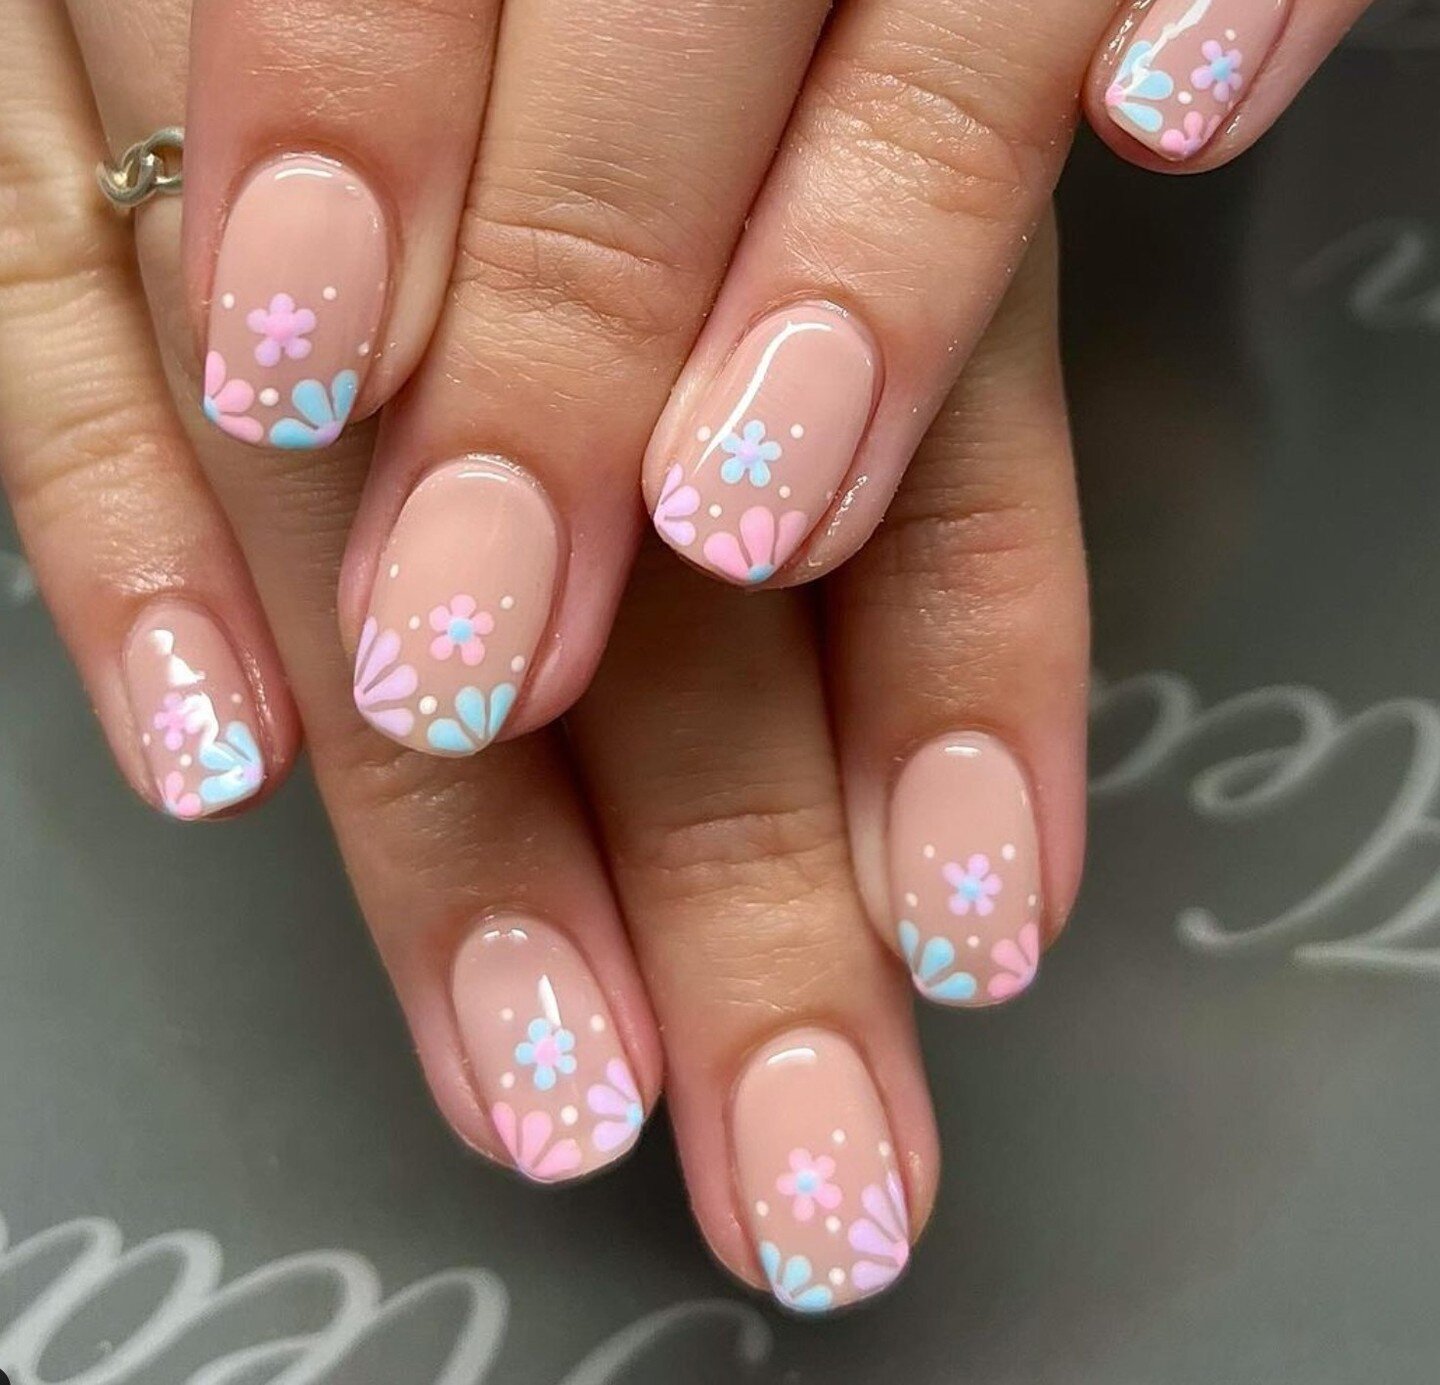 Easter nail inspo for 2024 🐰🌸🌼🐣

Screenshot and save for your next appointment! 

You can make an appointment on our app (check our website for more details &gt; link in bio).

Be sure to select a specific technician and &quot;book a full set&quo